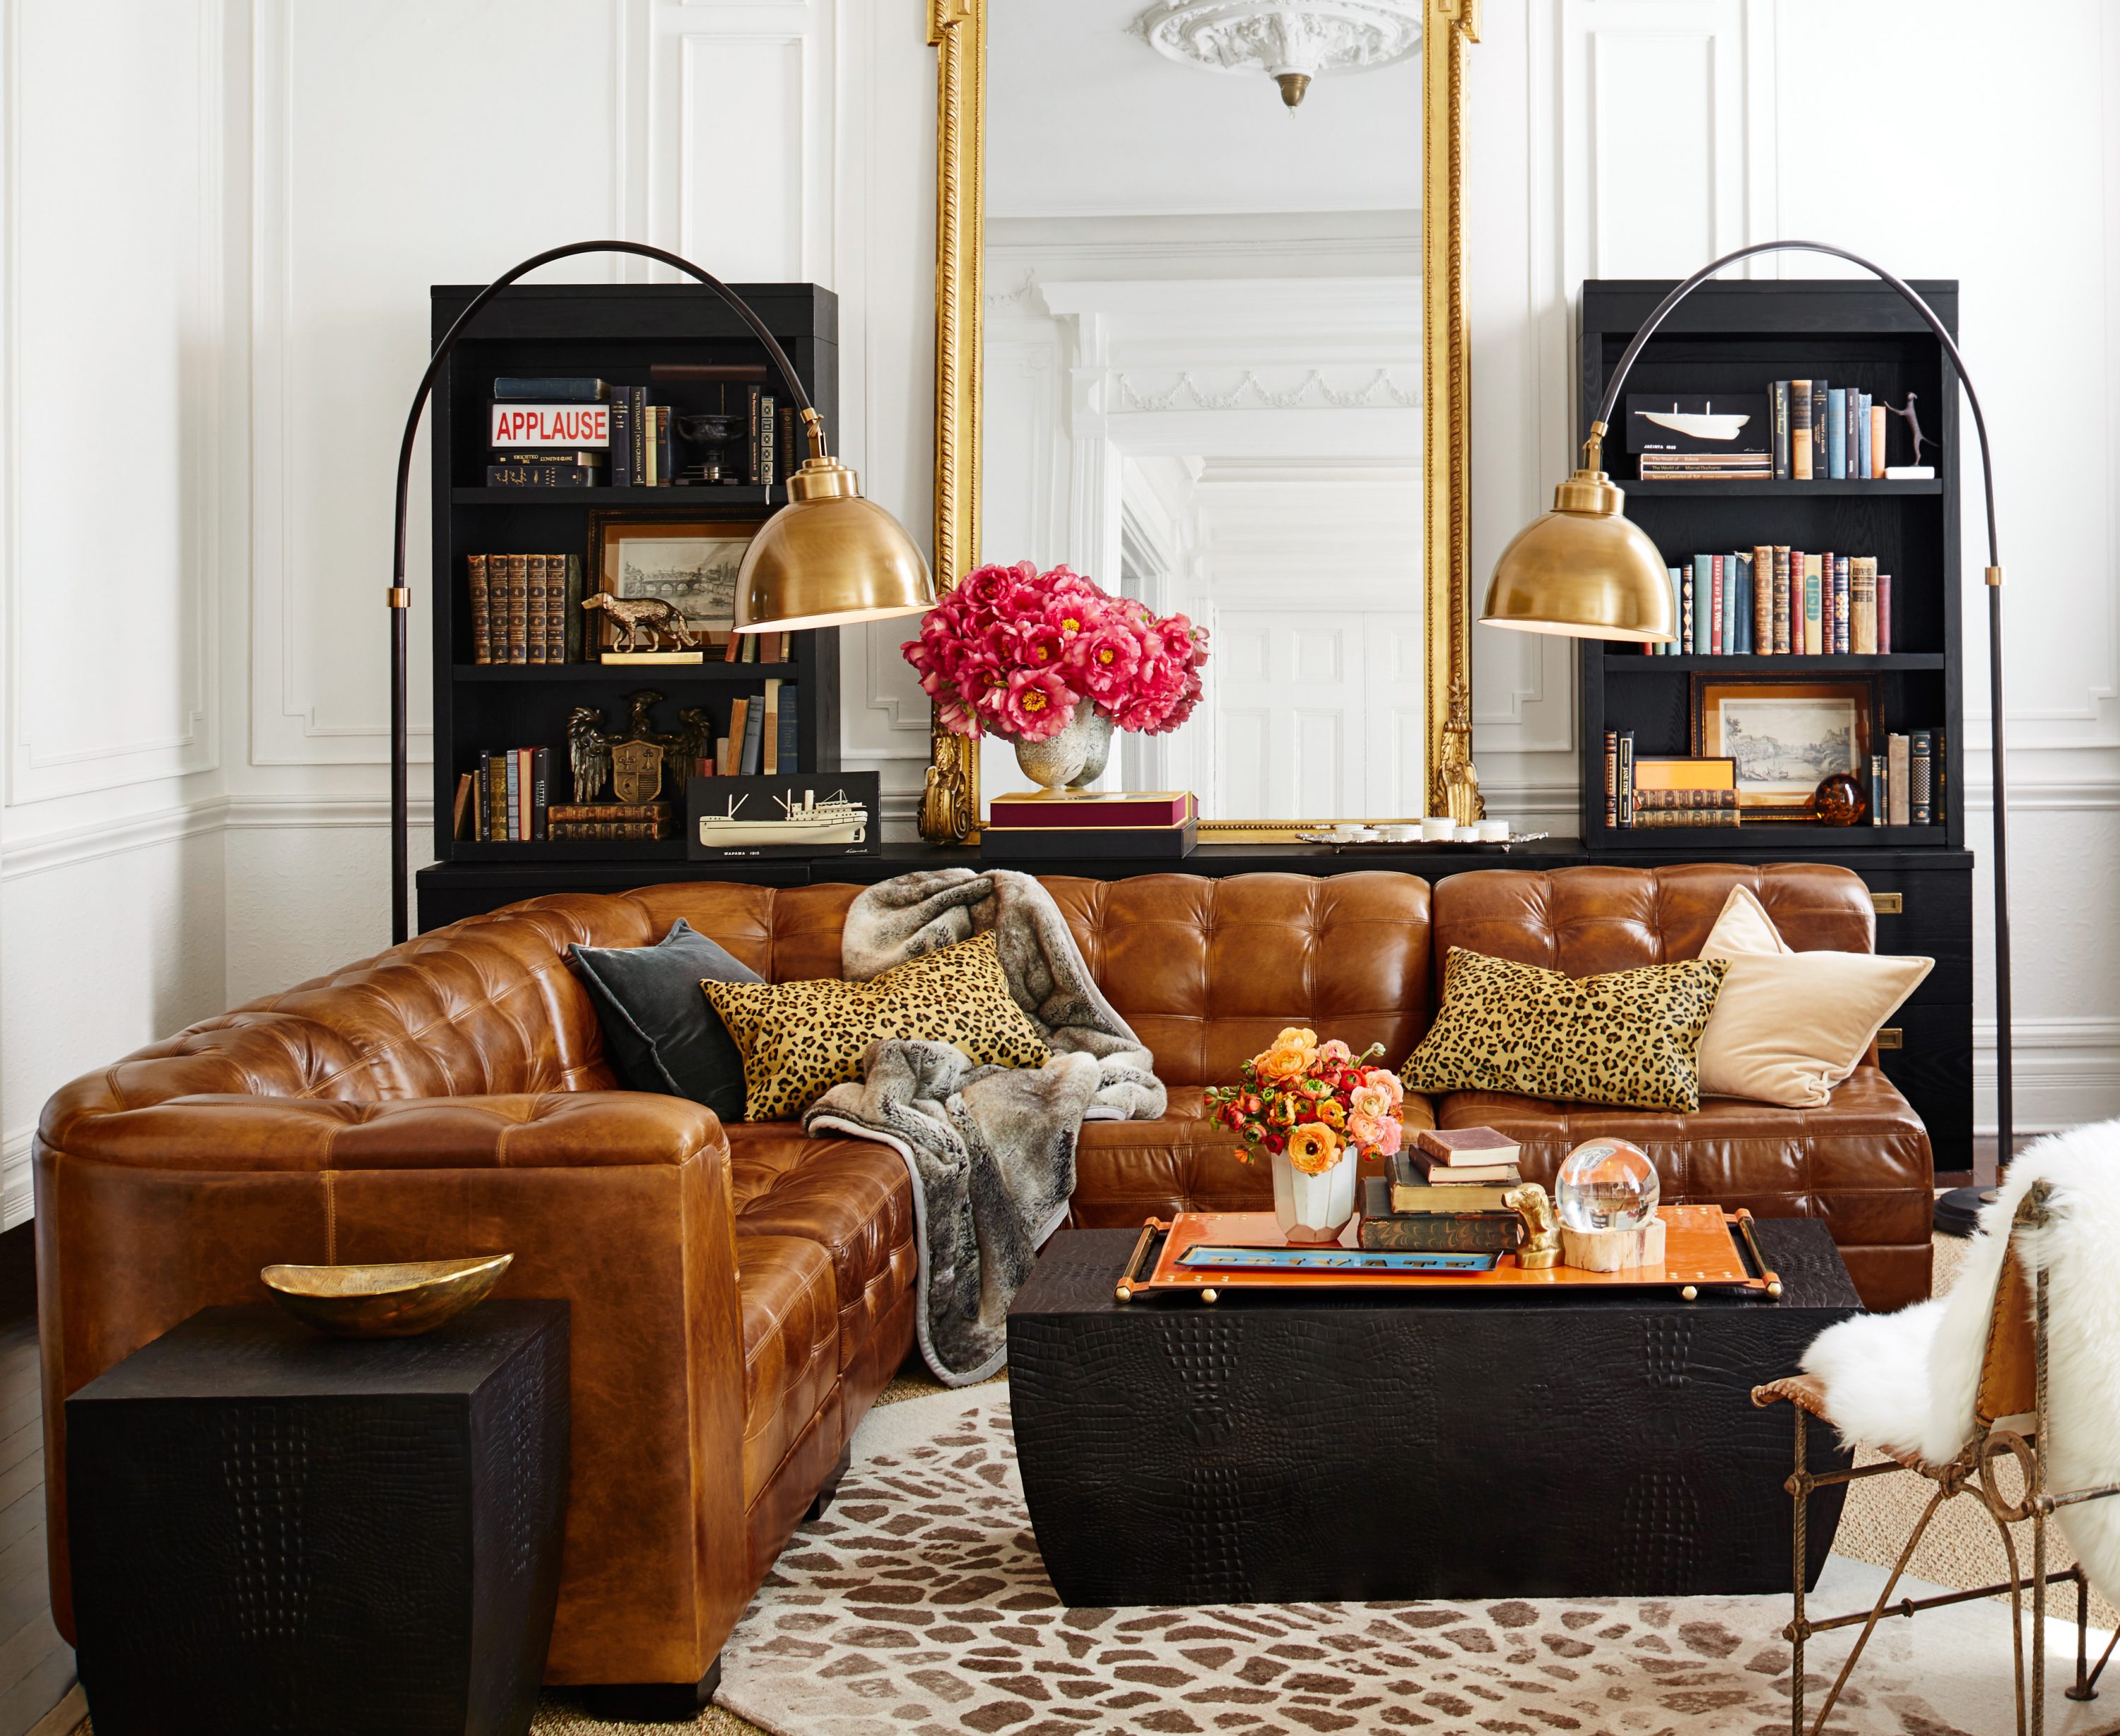 Pottery Barn's first designer collaboration with Ken Fulk - The